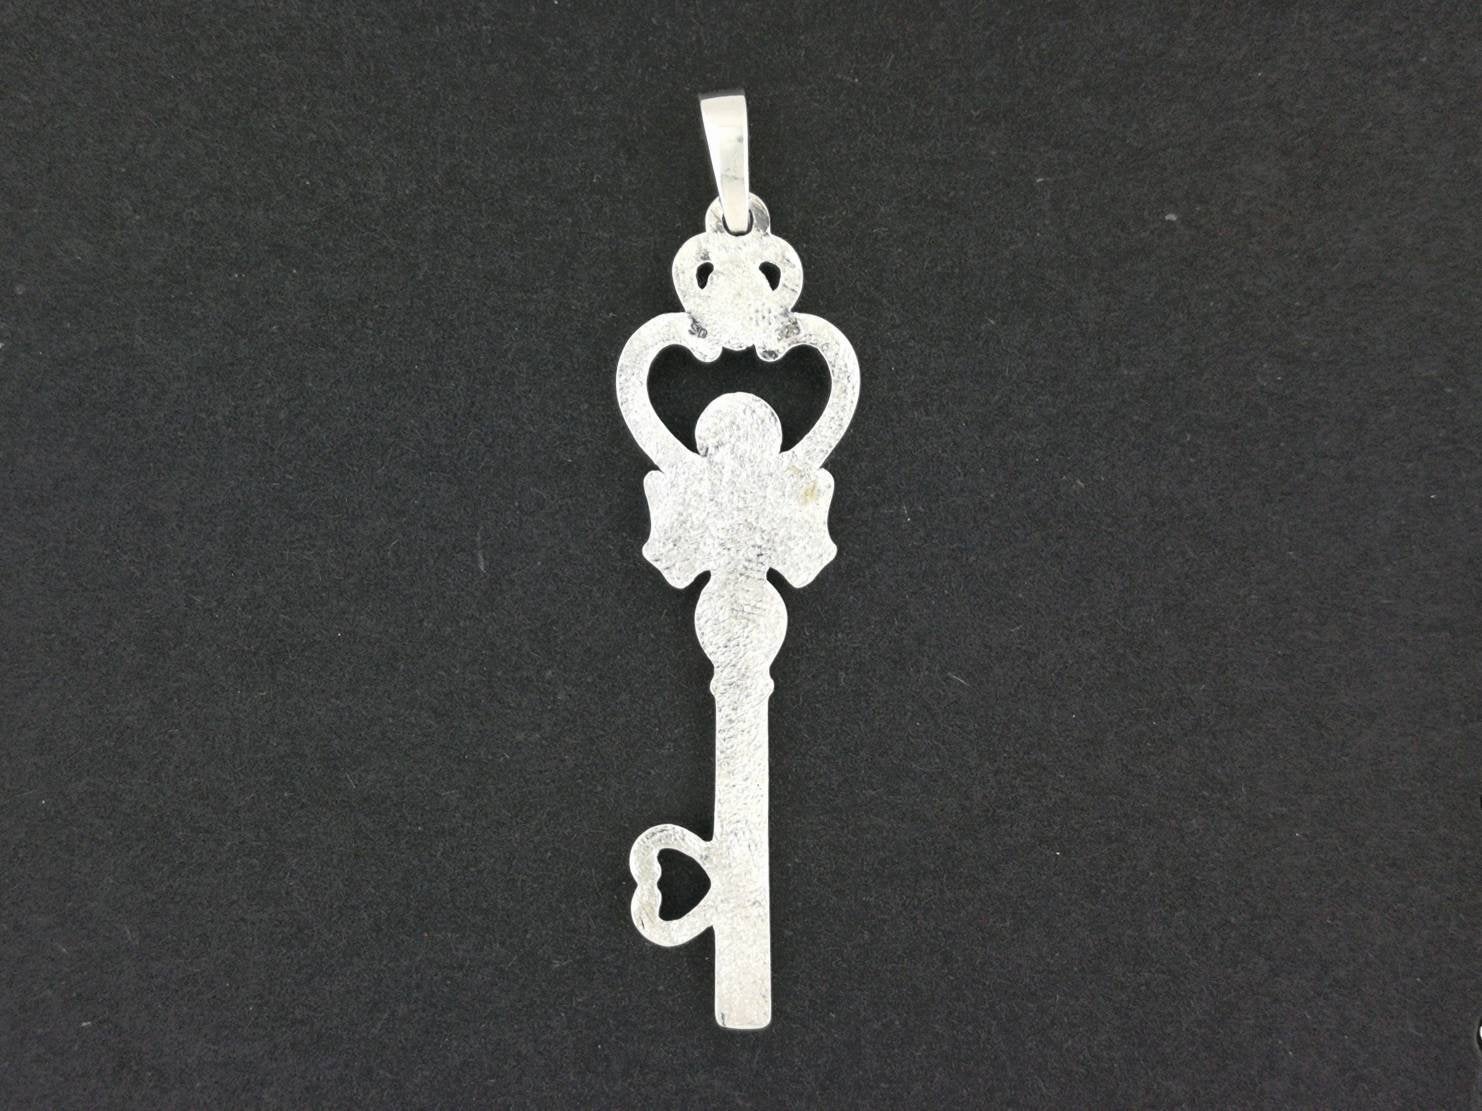 Time Key Pendant in Sterling Silver or Antique Bronze, Magical Girl Anime Pendant, Silver Key Pendant, Space Time Key Pendant, Space Time Key, Anime Silver Pendant, Anime Gemstone Pendant, Silver Key Pendant, Gamer Girl Jewelry, Gamer Girl Pendant